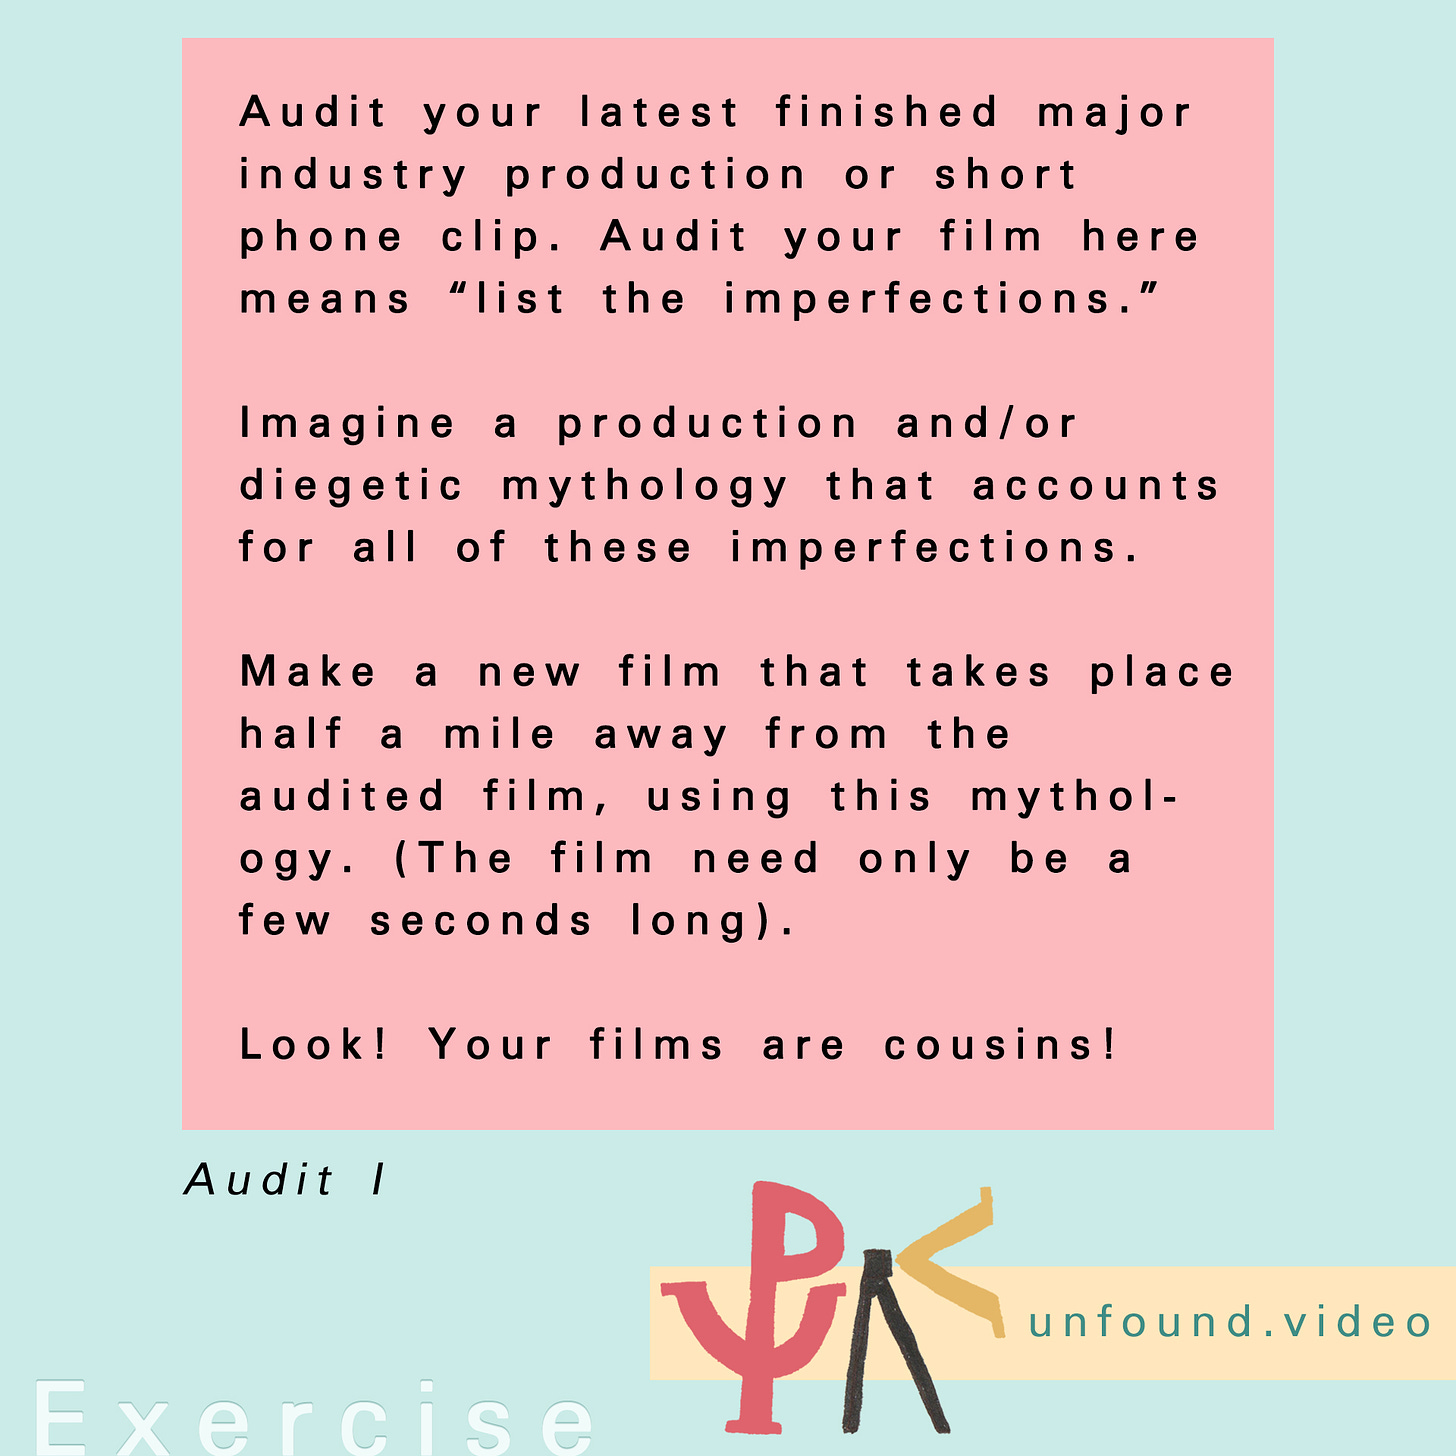 Exercise. Text reads: Audit your latest finished major industry production or short phone clip. Audit your film here means “list the imperfections.”  Imagine a production and/or diegetic mythology that accounts for all of these imperfections.  Make a new film that takes place half a mile away from the audited film, using this mythology. (The film need only be a few seconds long).  Look! Your films are cousins!